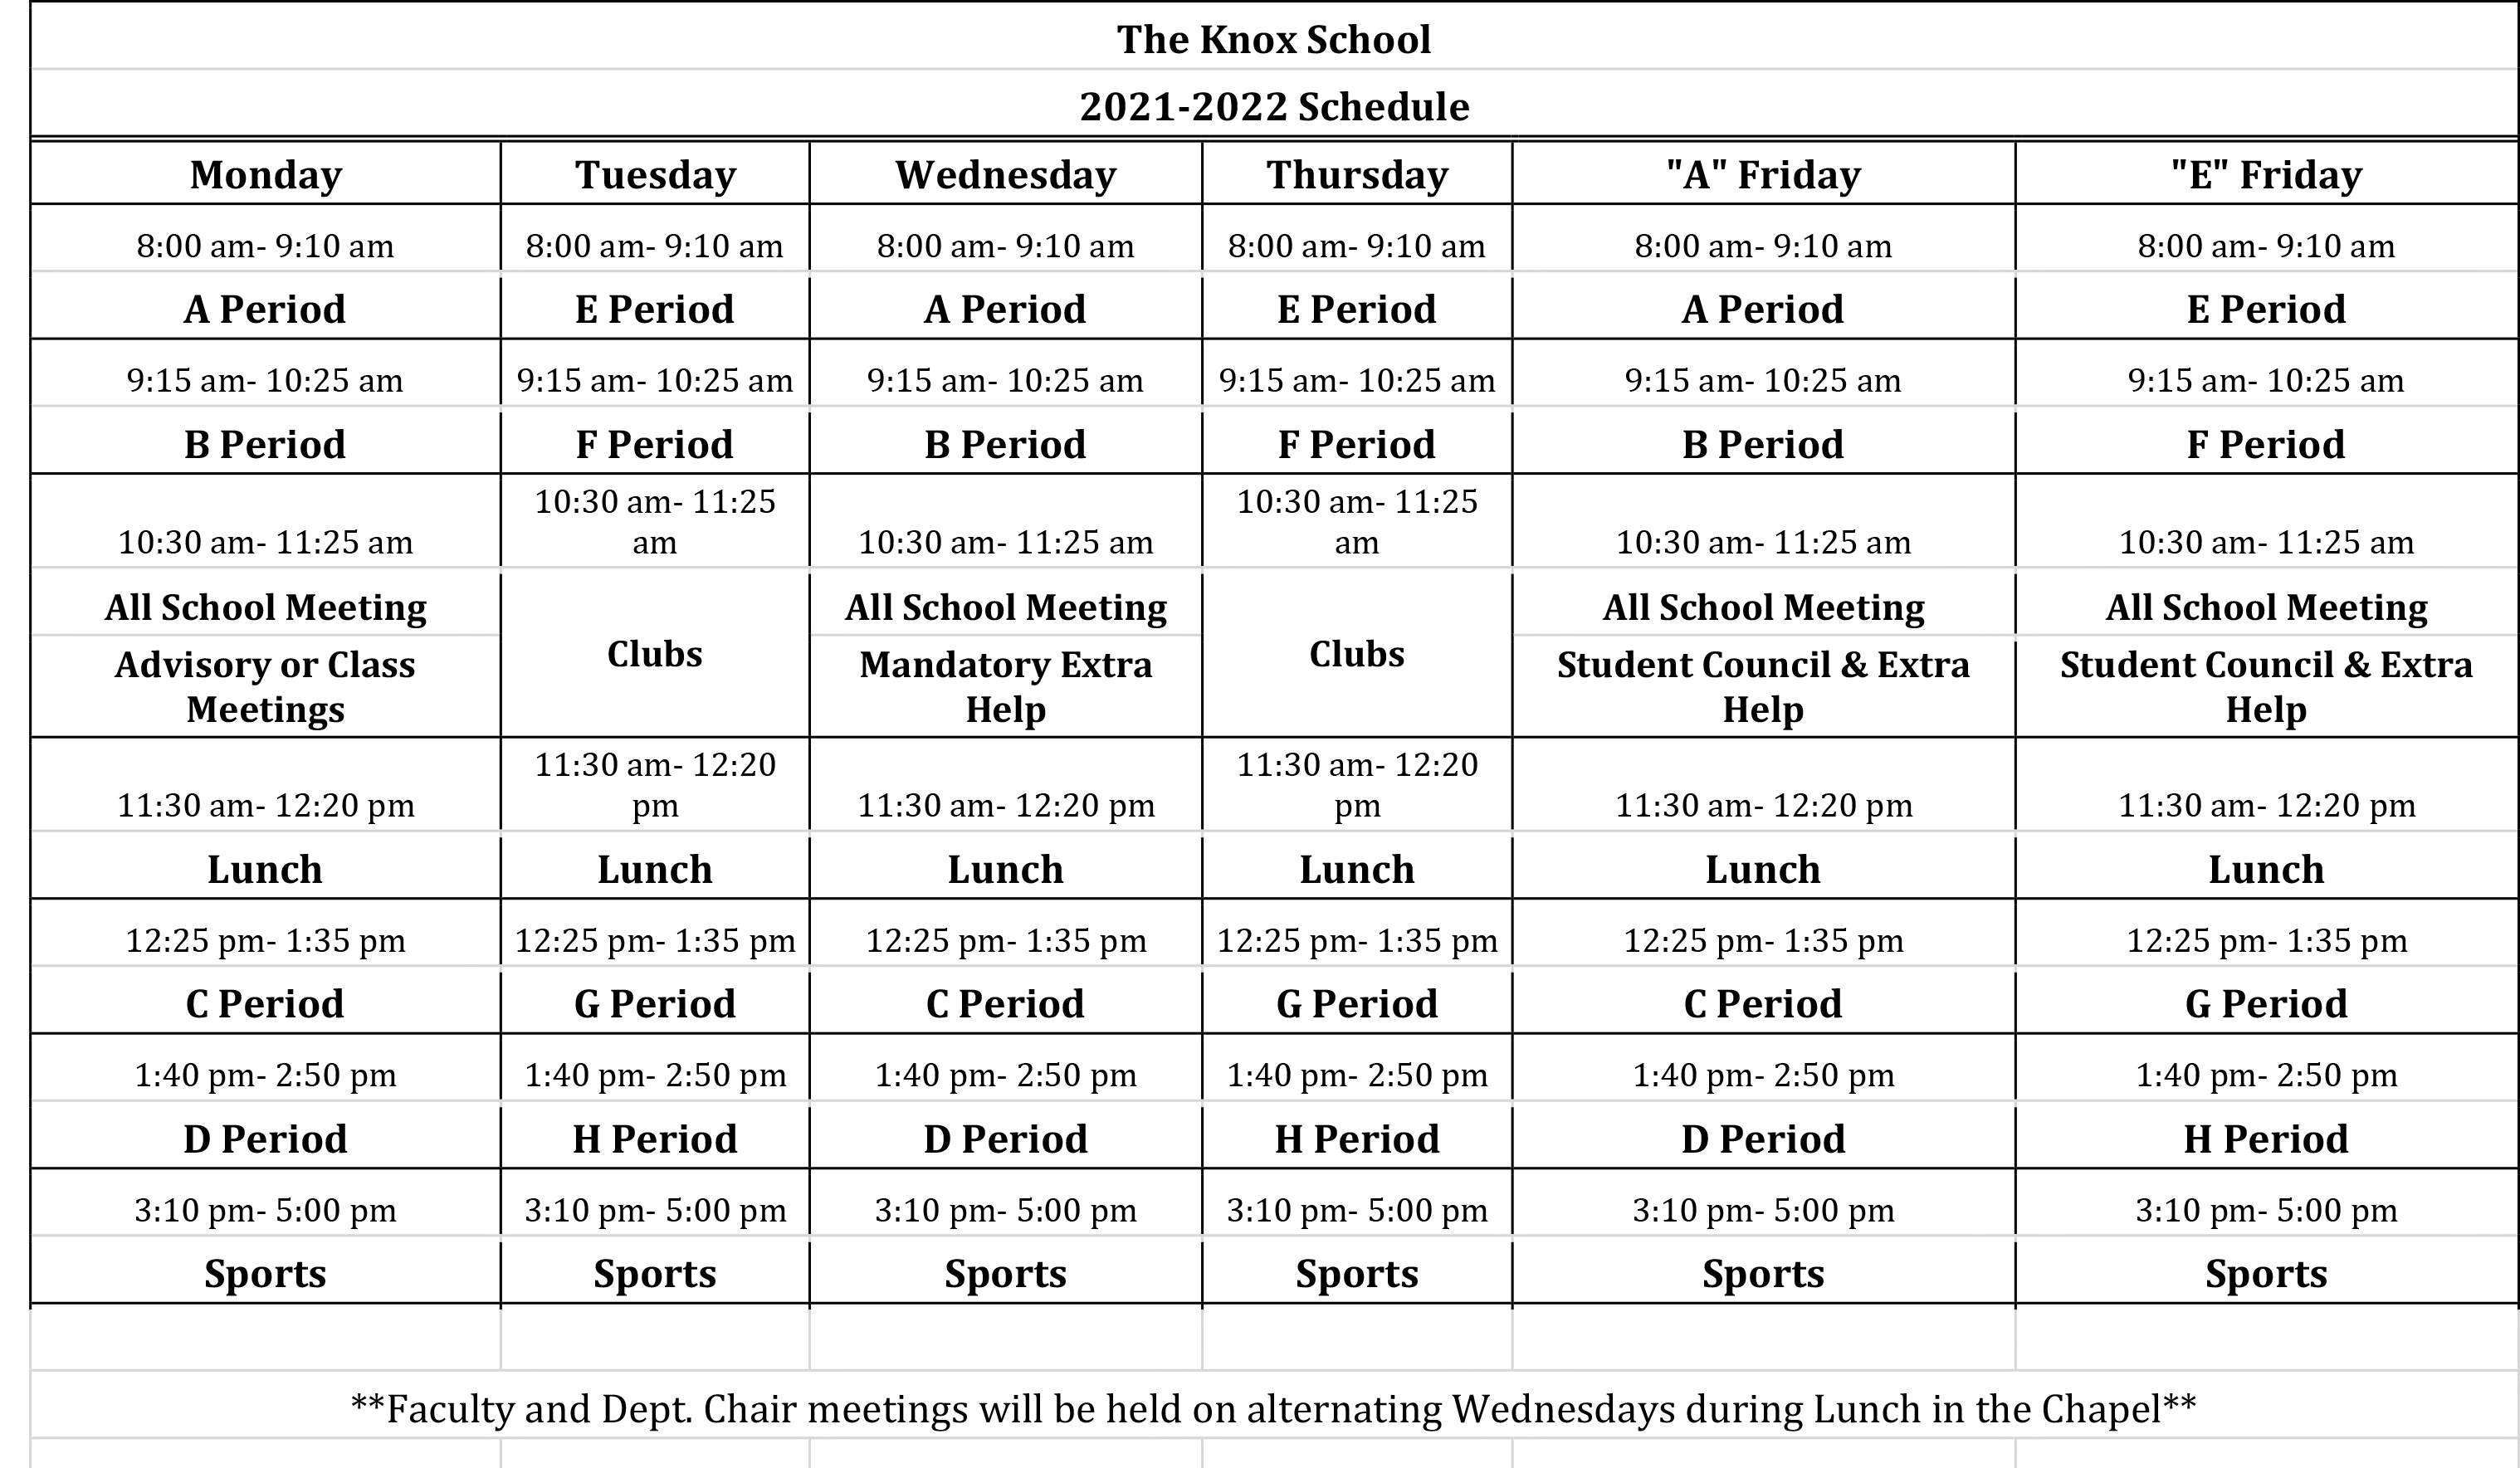 Image of the Daily Schedule of Classes